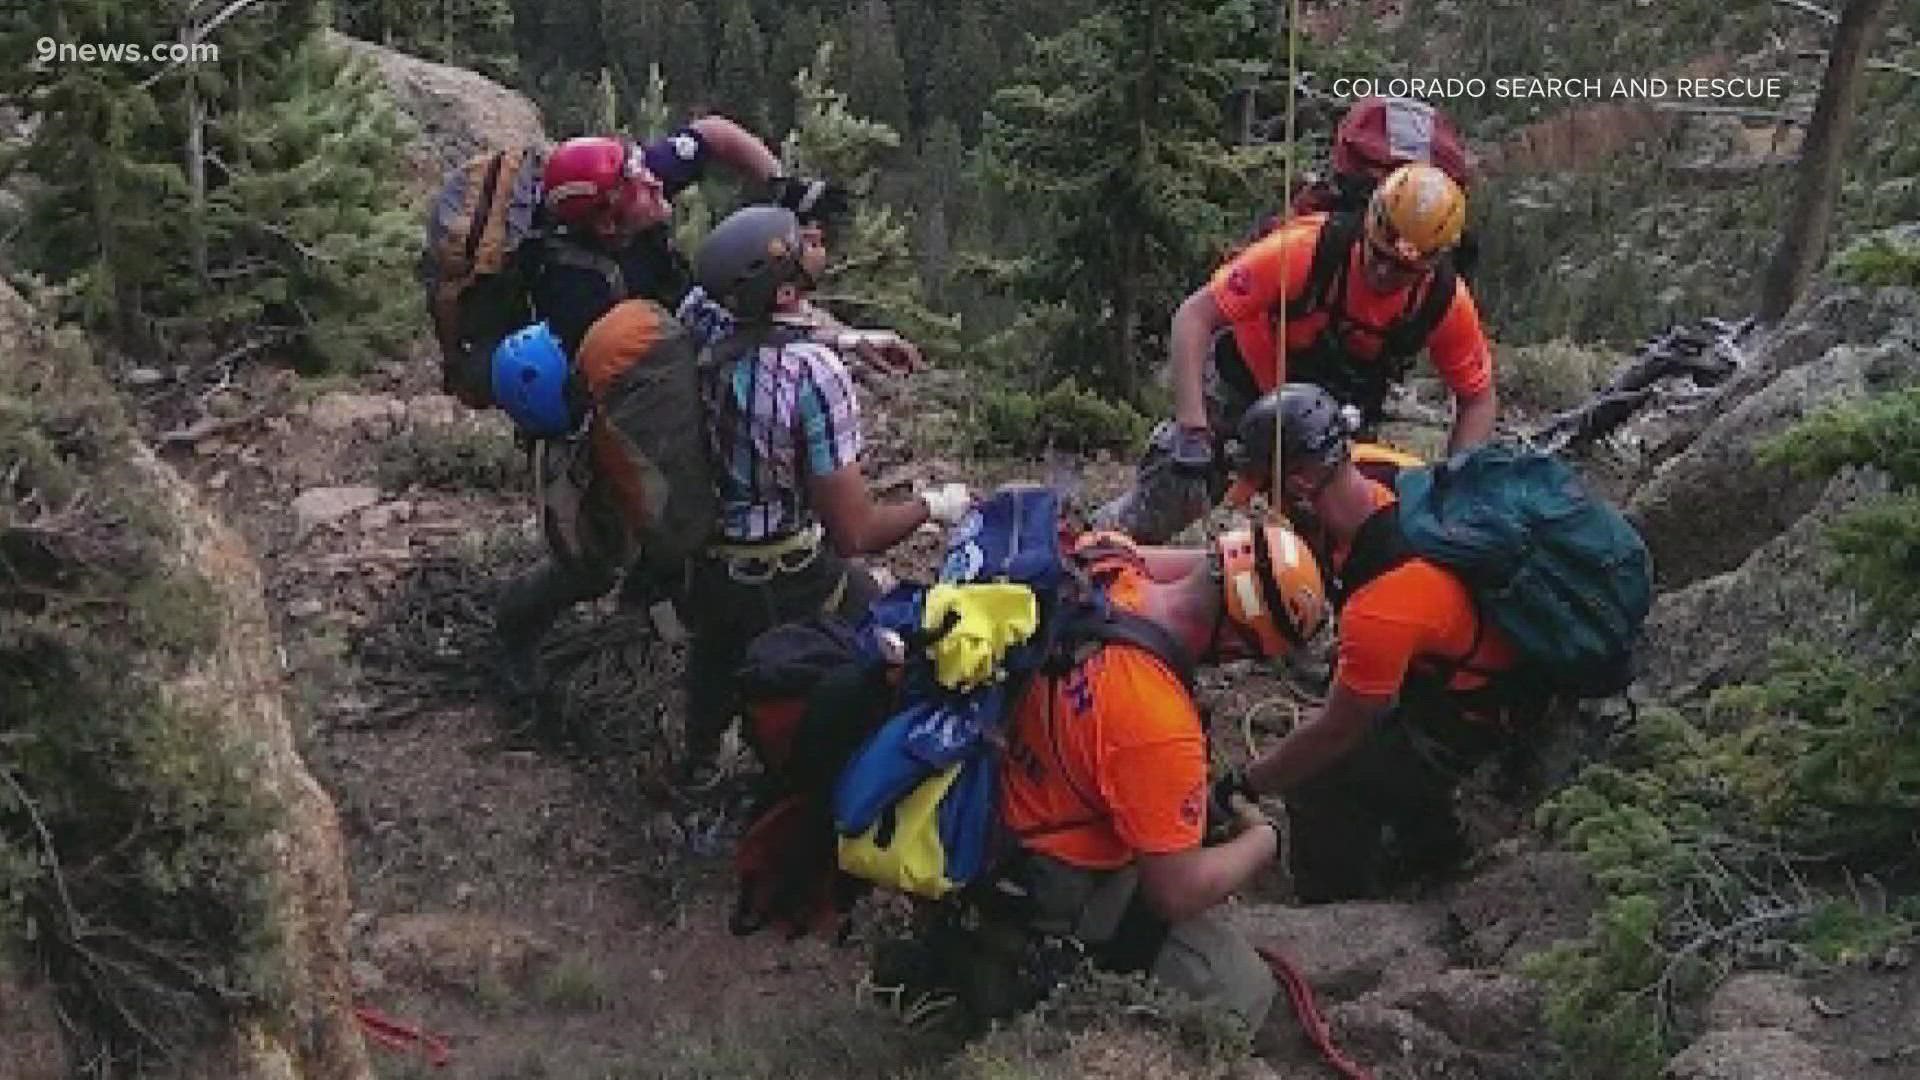 Some teams are reporting an increase in calls for rescue this year.